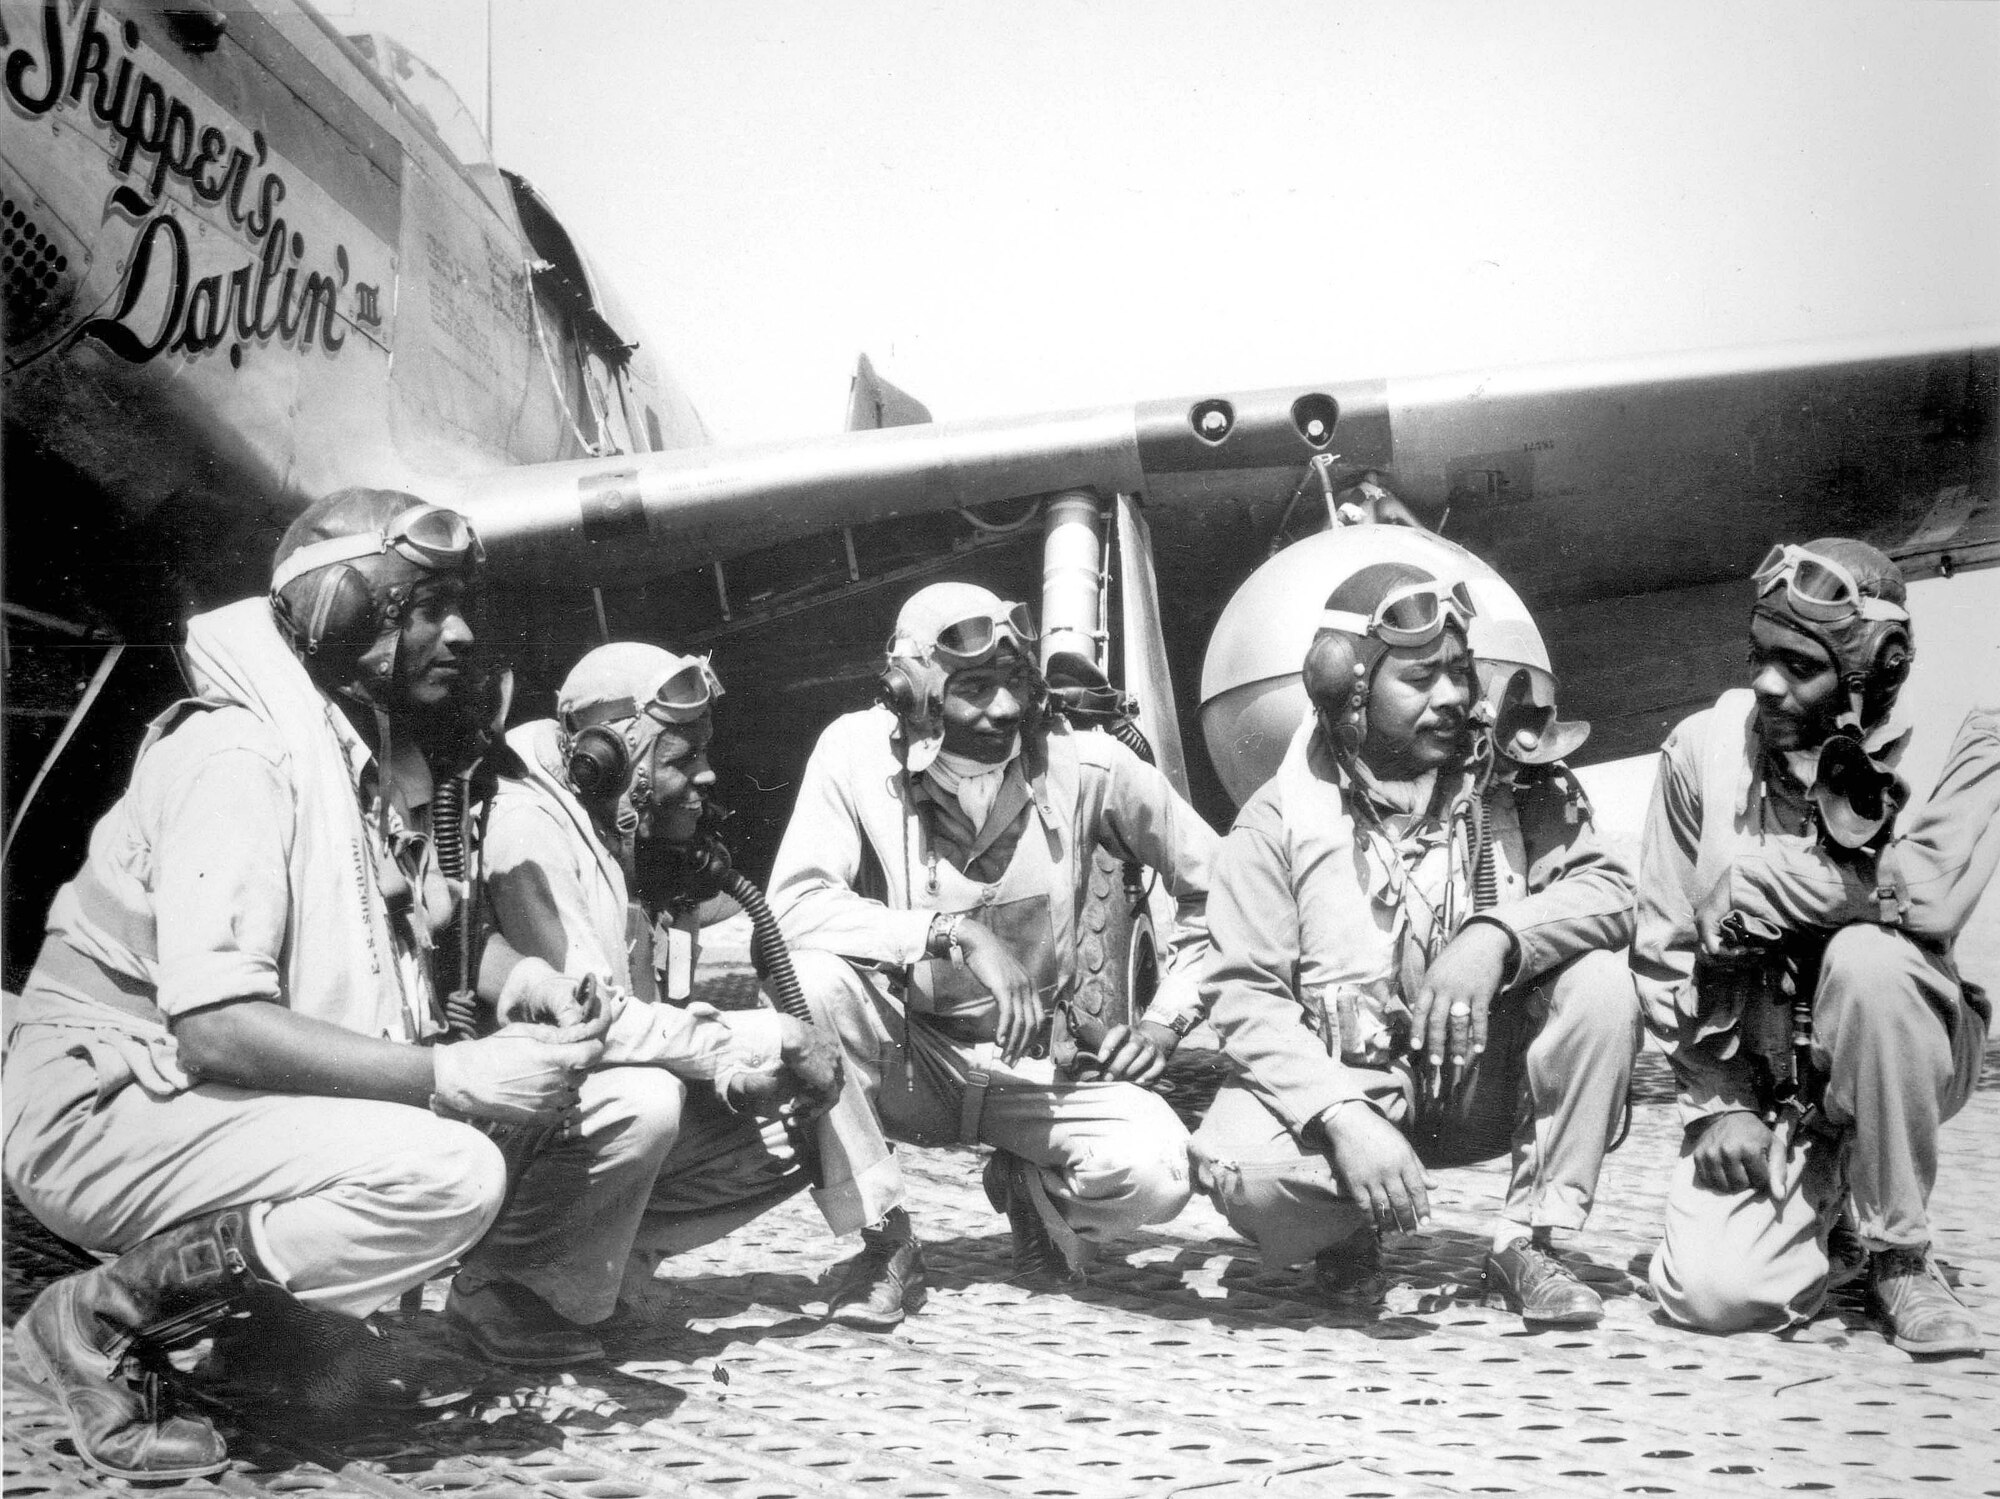 RAMITELLI, Italy -- (From left) Lt. Dempsey W. Morgran, Lt. Carroll S. Woods, Lt. Robert H. Nelron Jr., Capt. Andrew D. Turner and Lt. Clarence P. Lester were pilots with the 332nd Fighter Group.  The Airmen with the elite, all-black fighter group were better known as Tuskegee Airmen.  (U.S. Air Force photo)